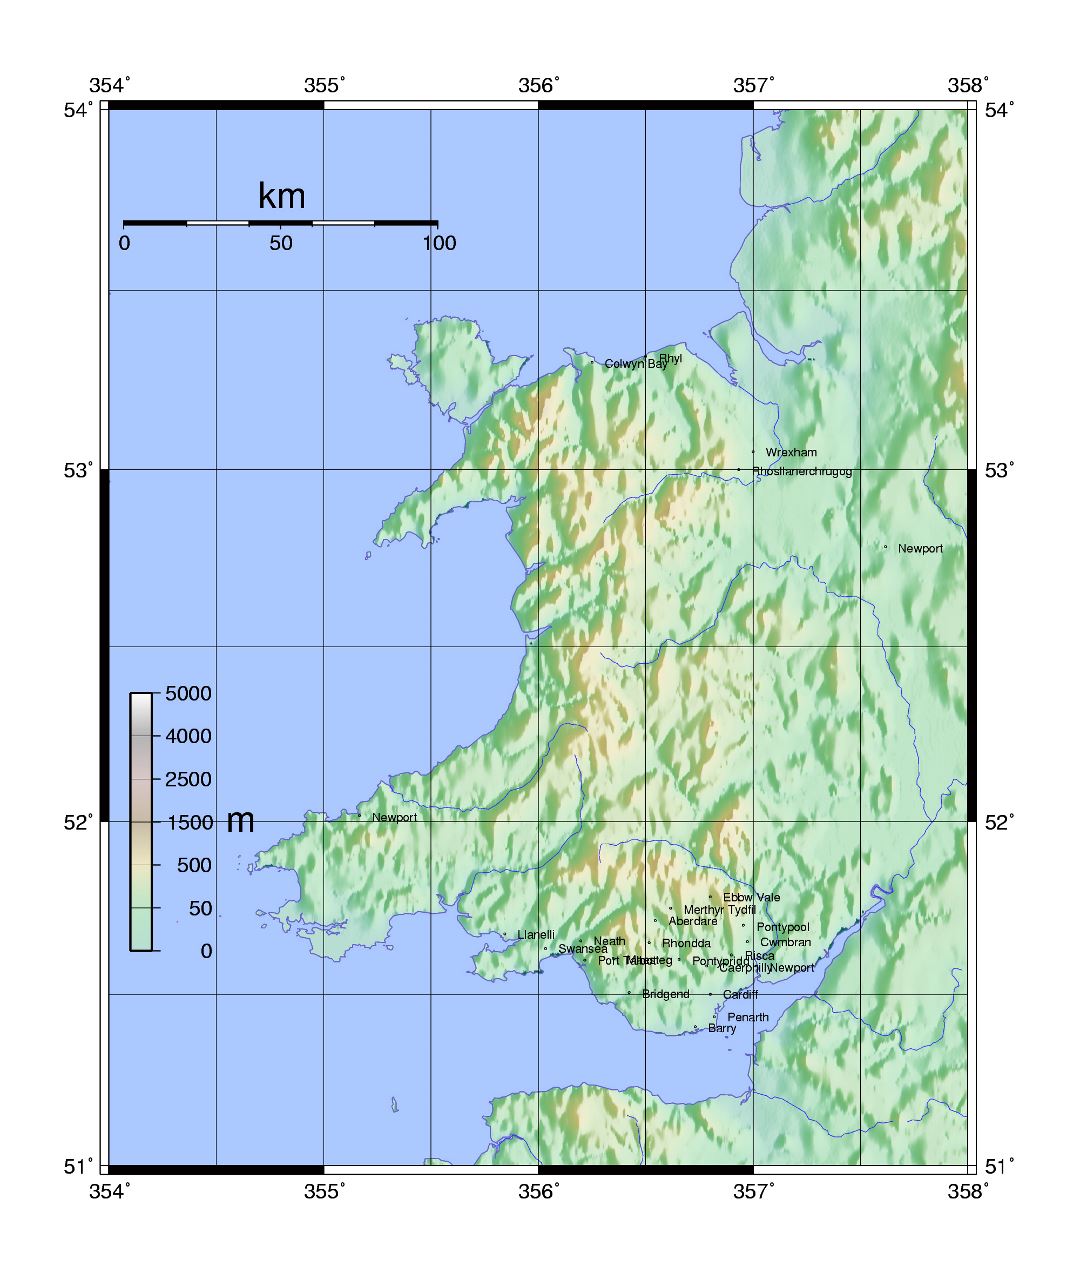 Large topographical map of Wales